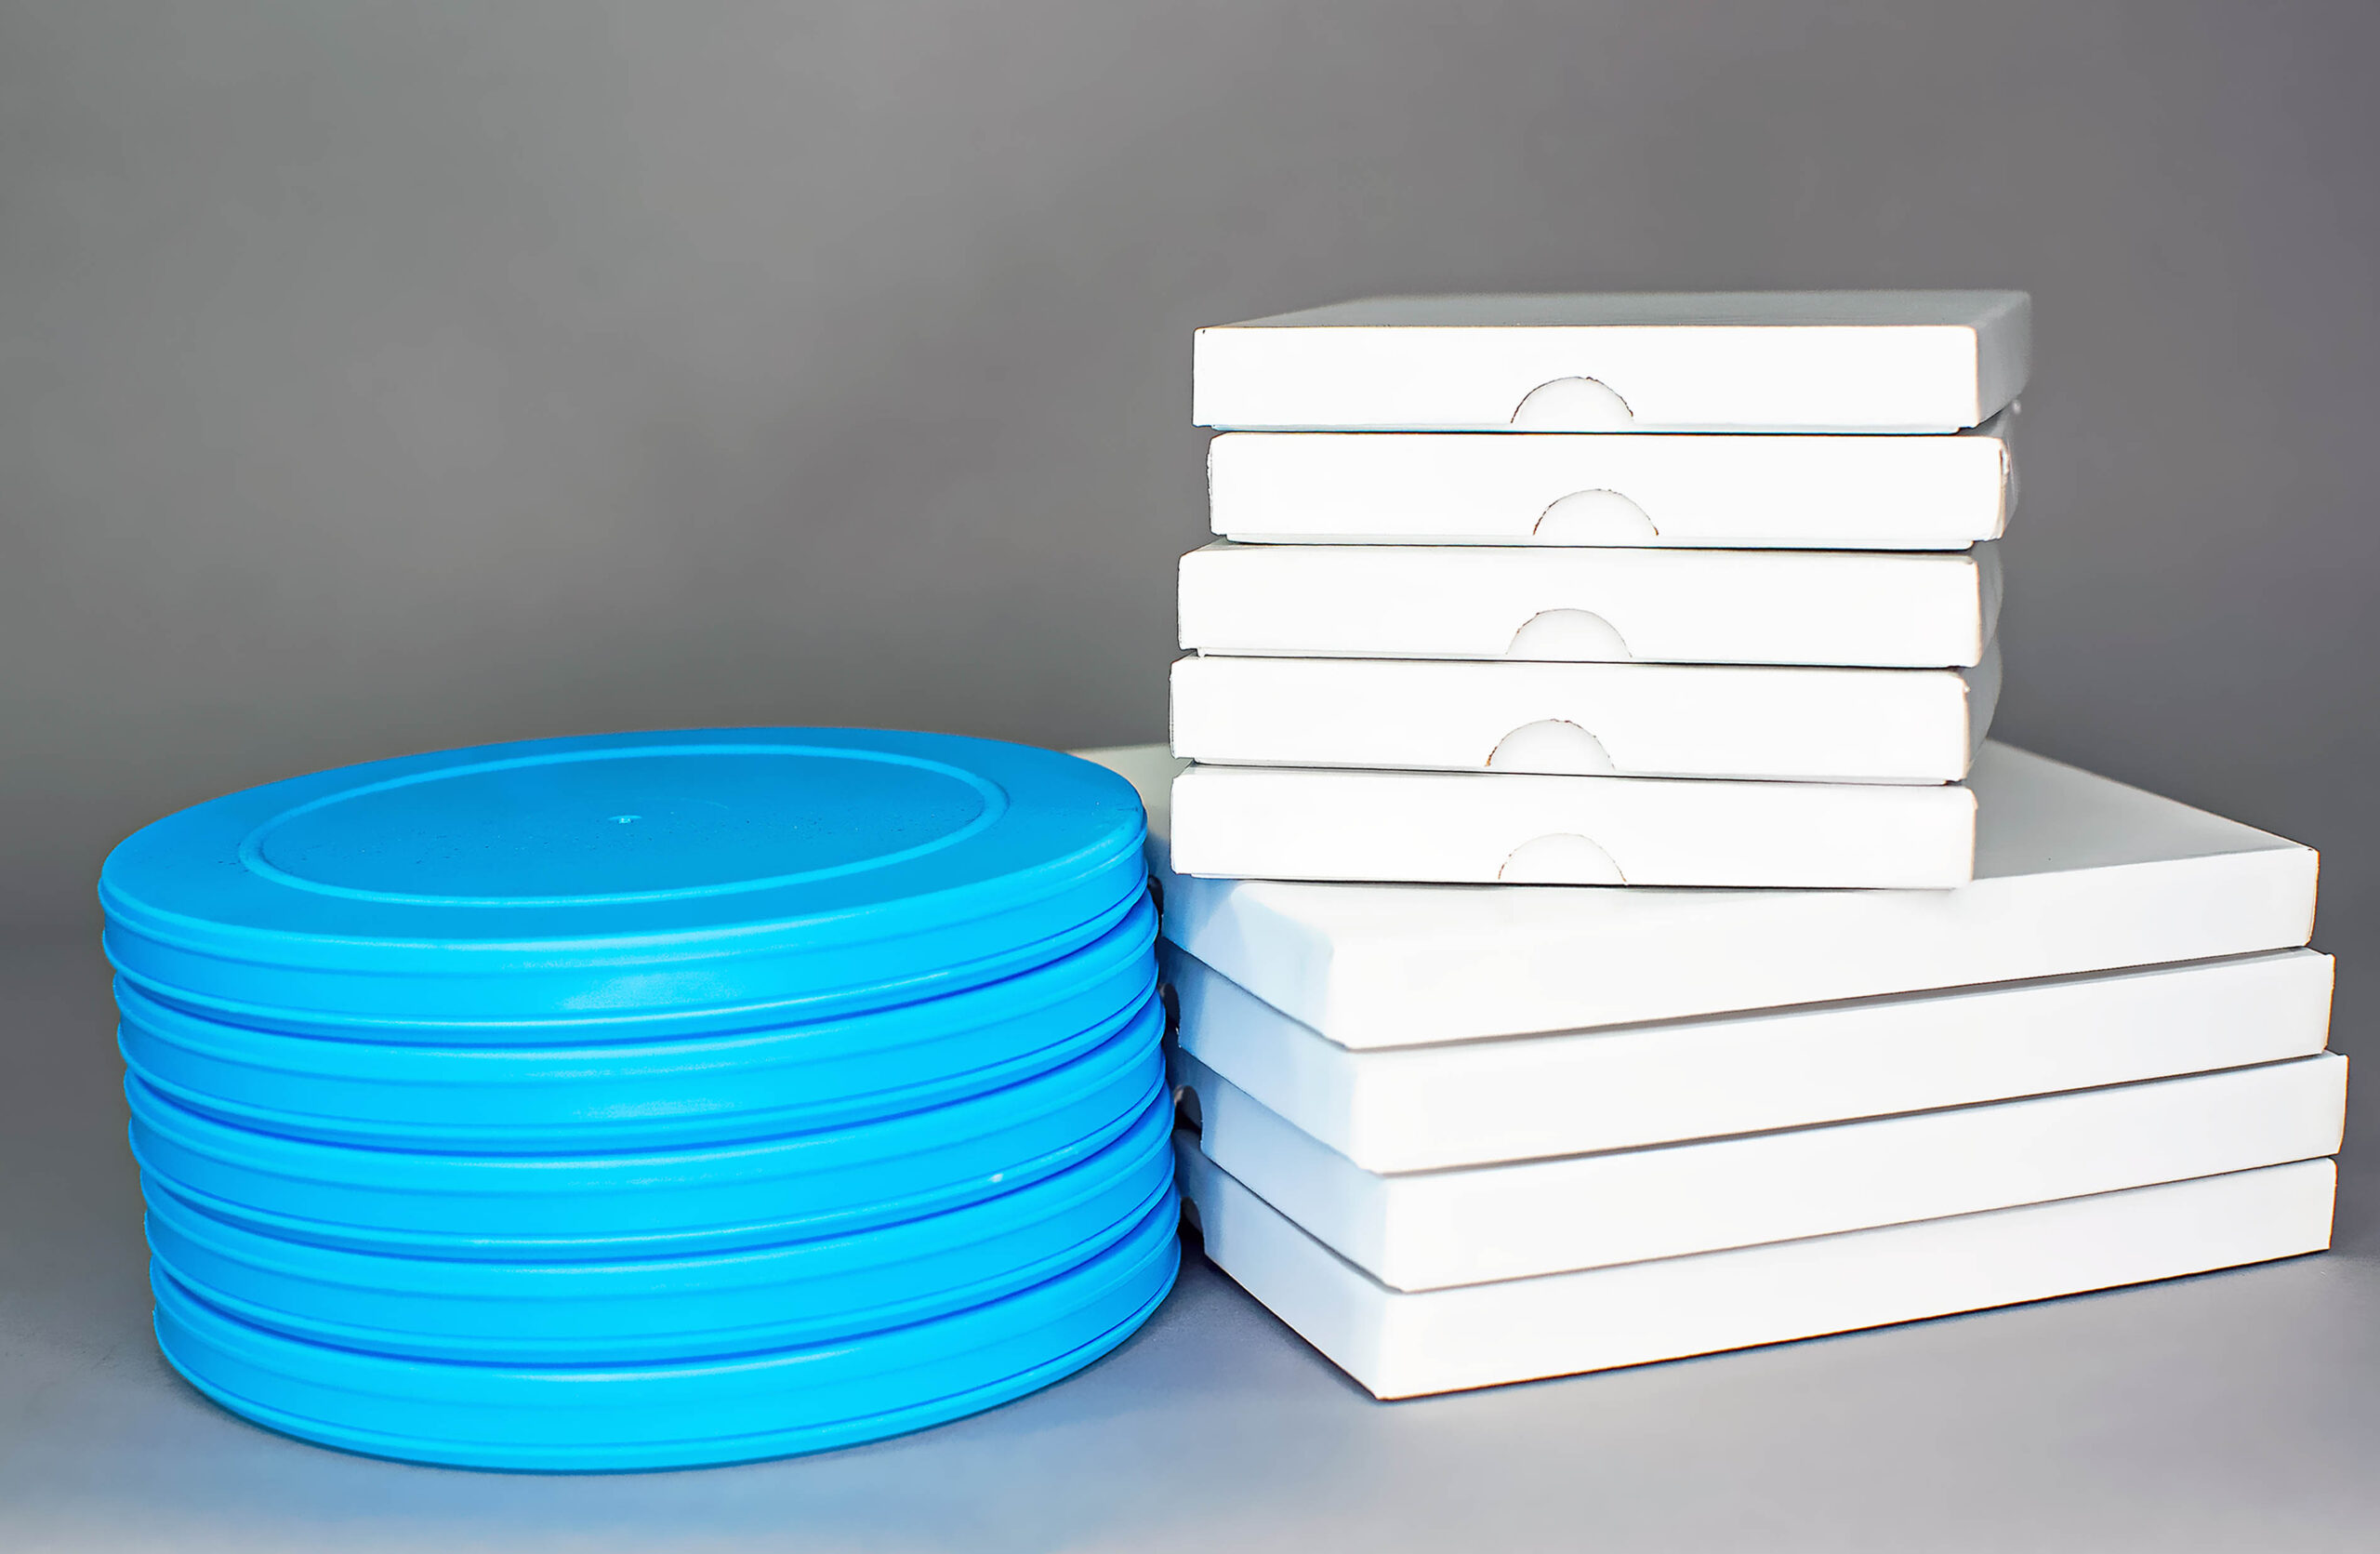 8mm Generic Film Storage Containers – Welcome to Spectra Film and